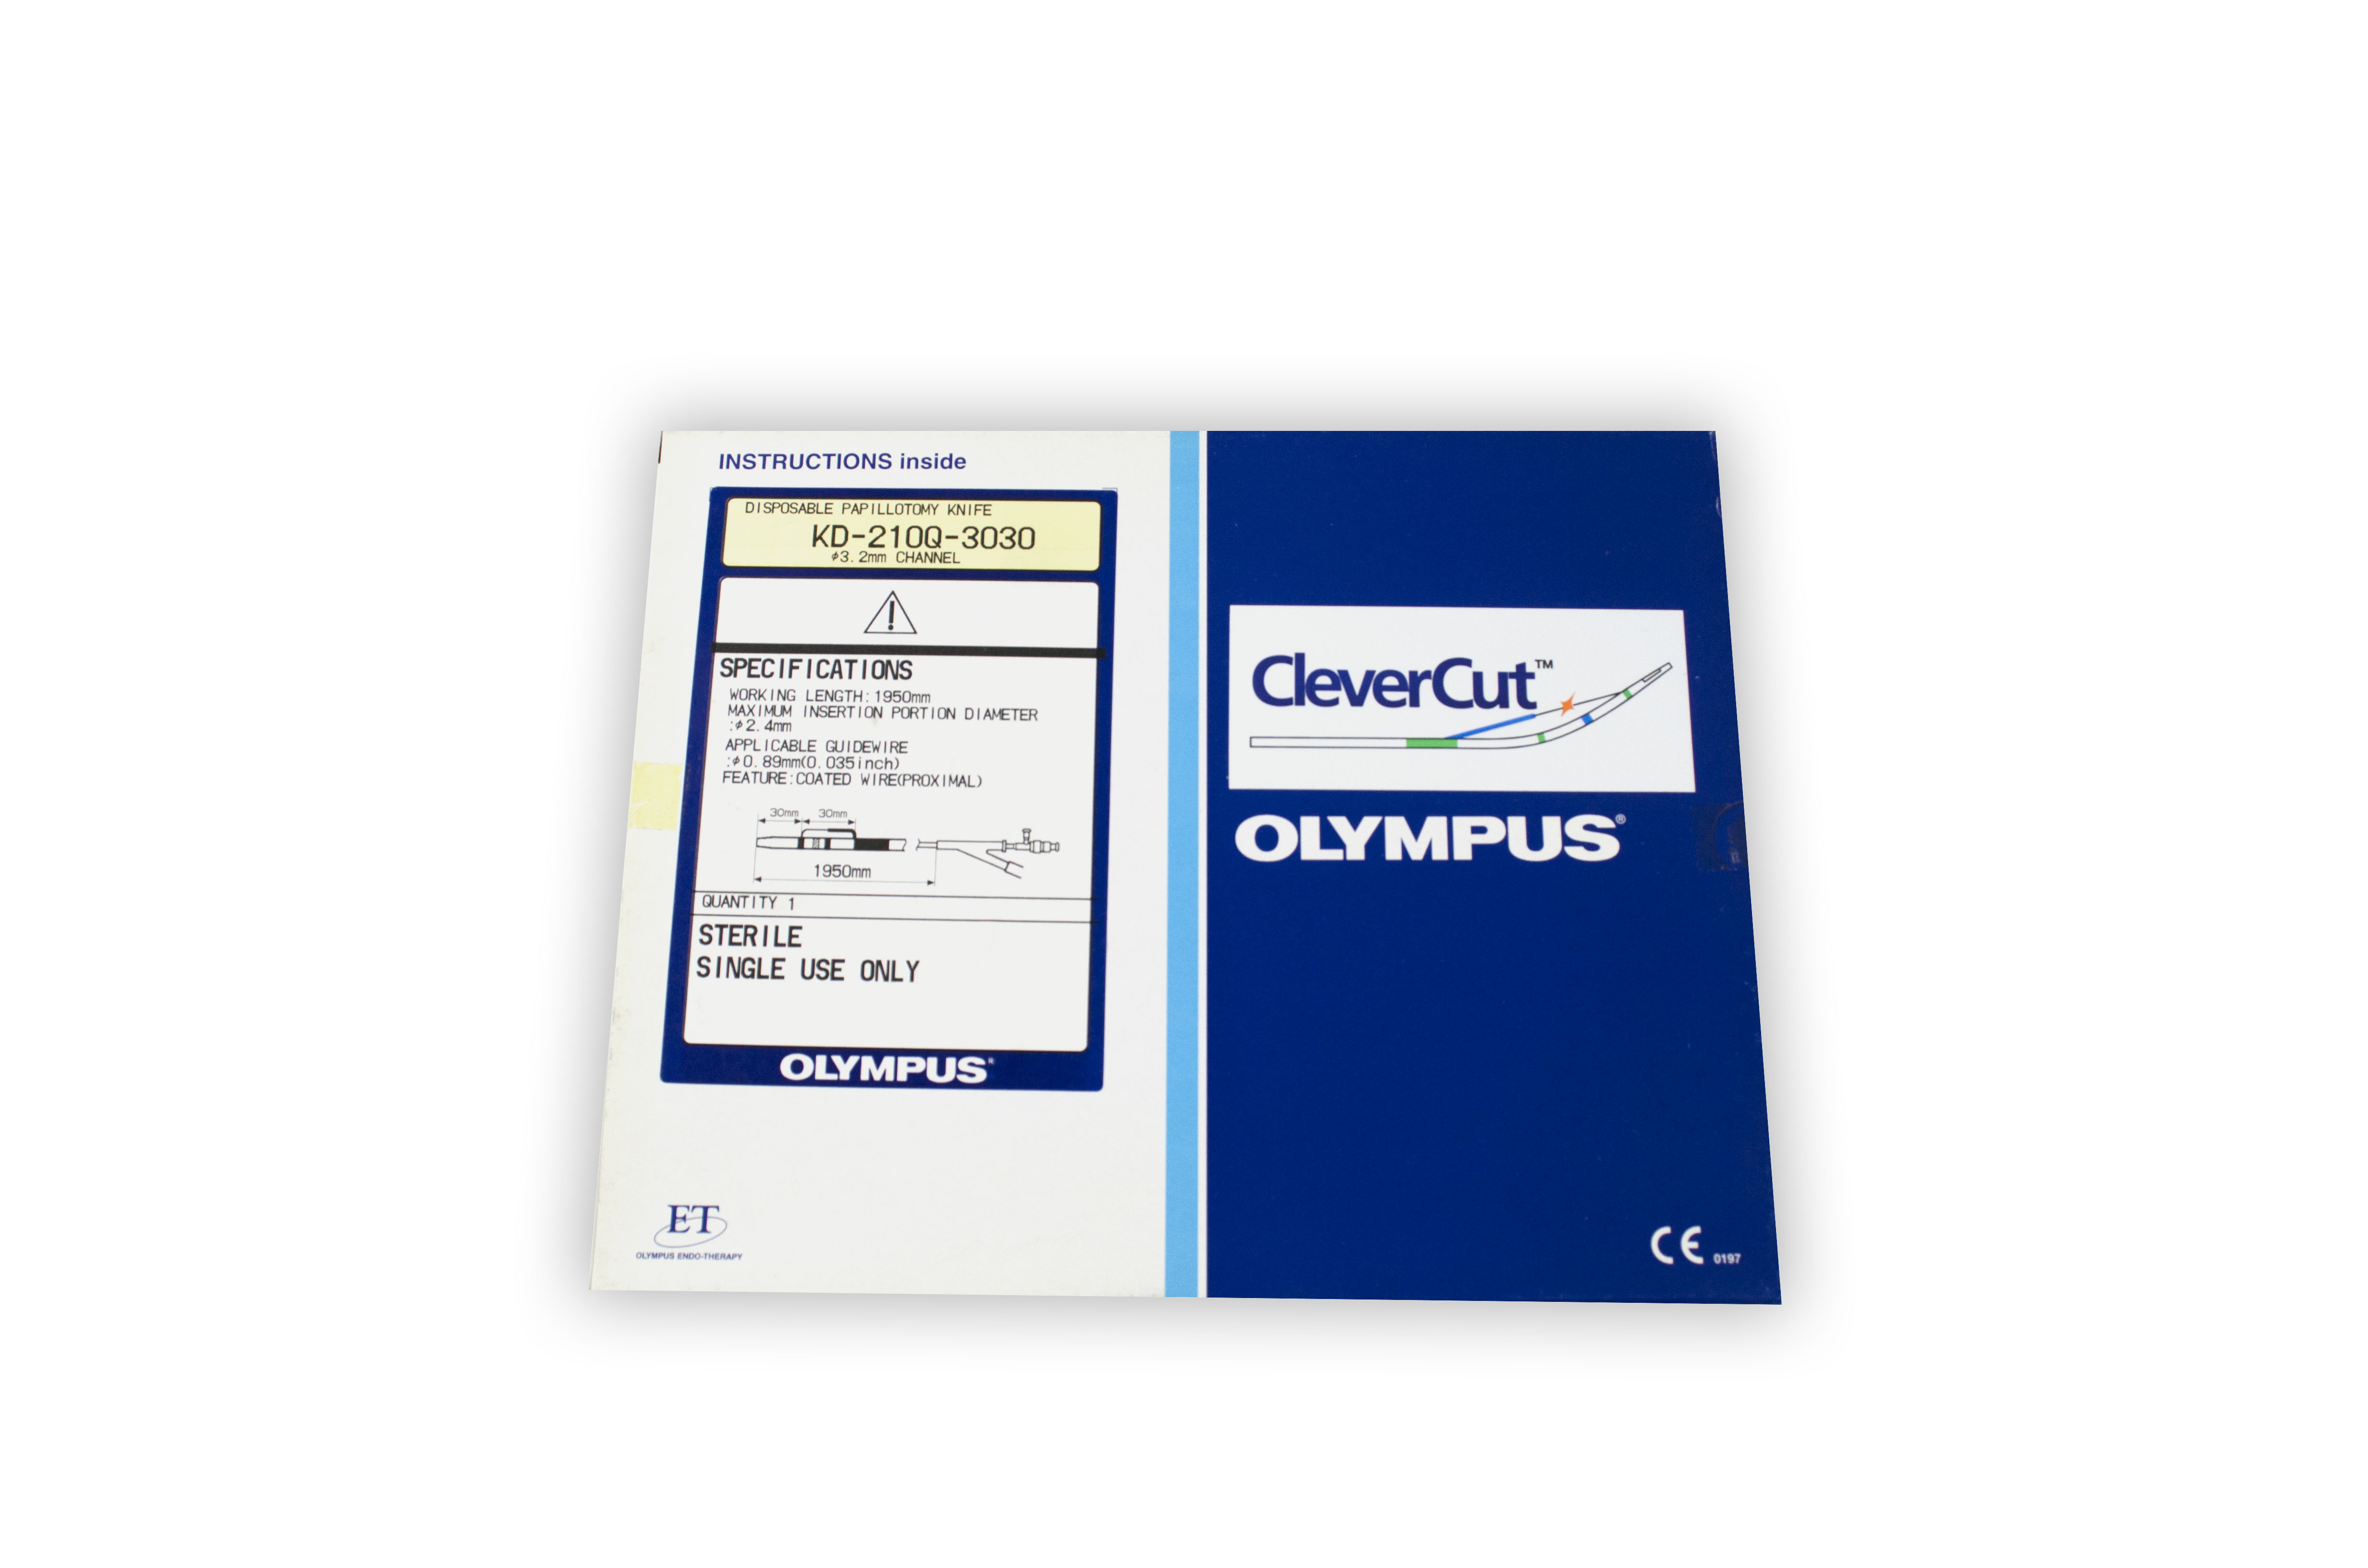 [Out-of-Date] Olympus Disposable Sphincterotome - KD-210Q-3030